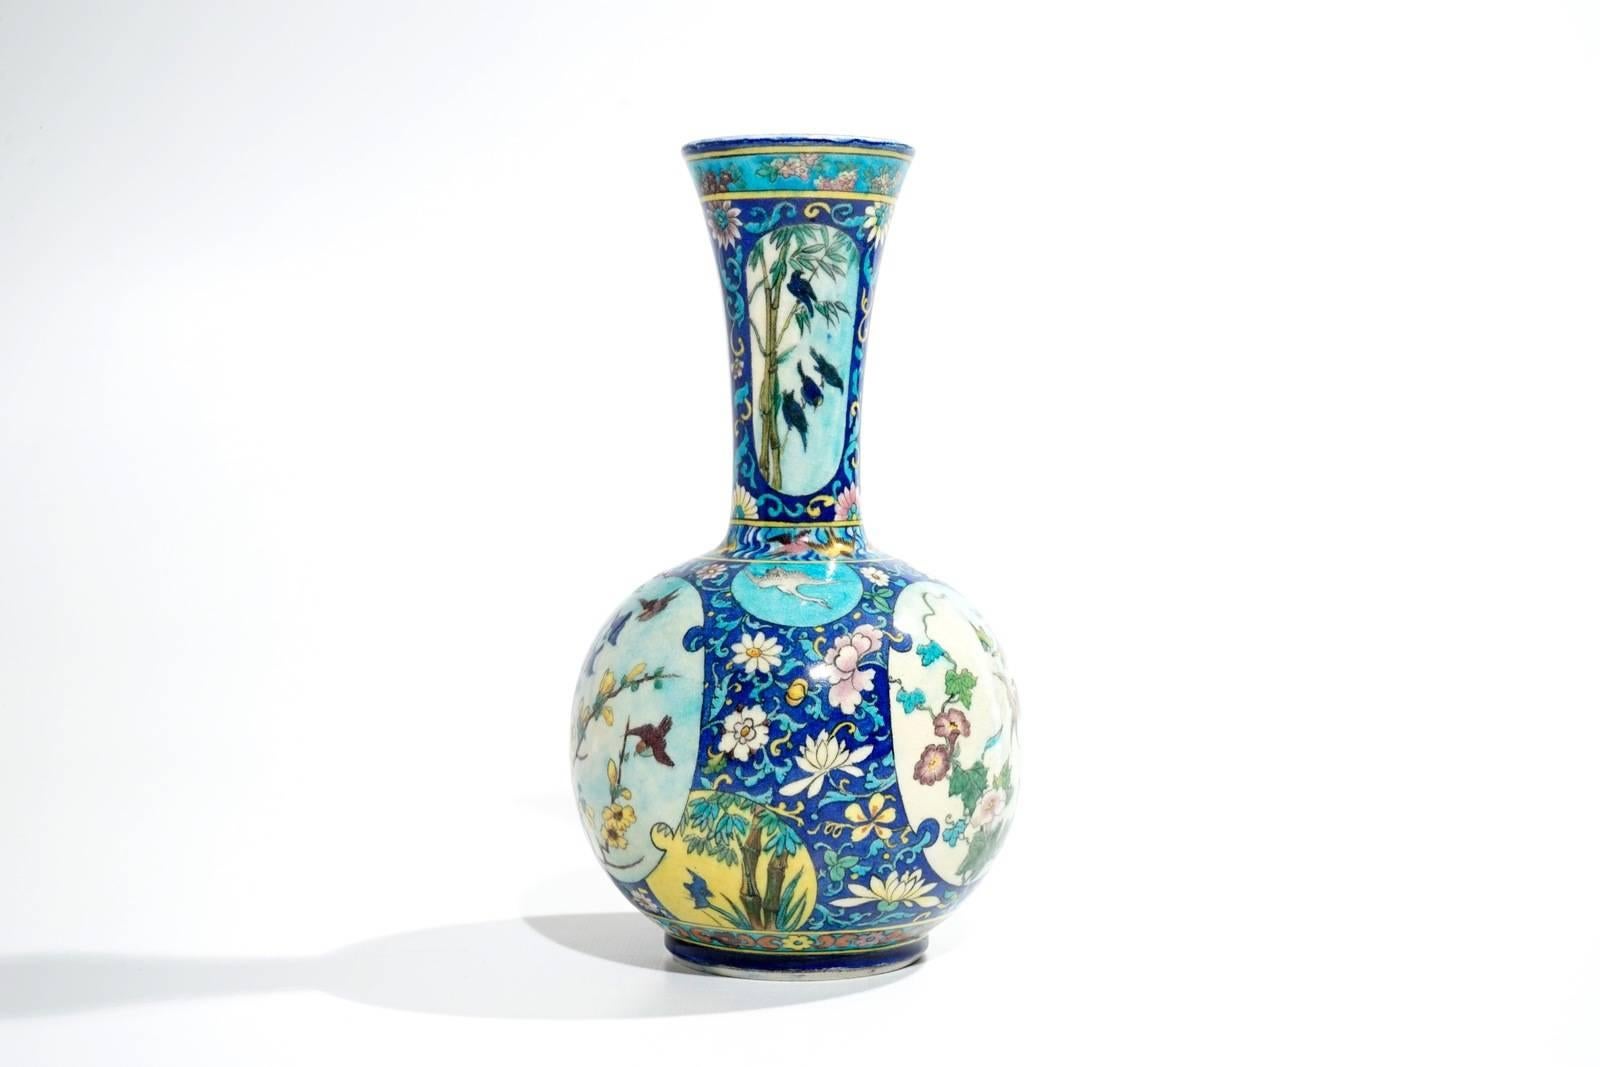 A Theodore Deck (1823-1891) polychromed Faience Baluster vase, the body richly decorated with vegetation’s, birds, butterflies and stork in the Japanese Taste in Cloisonné Imitation
Impressed TH.DECK mark under the base.
circa 1870.